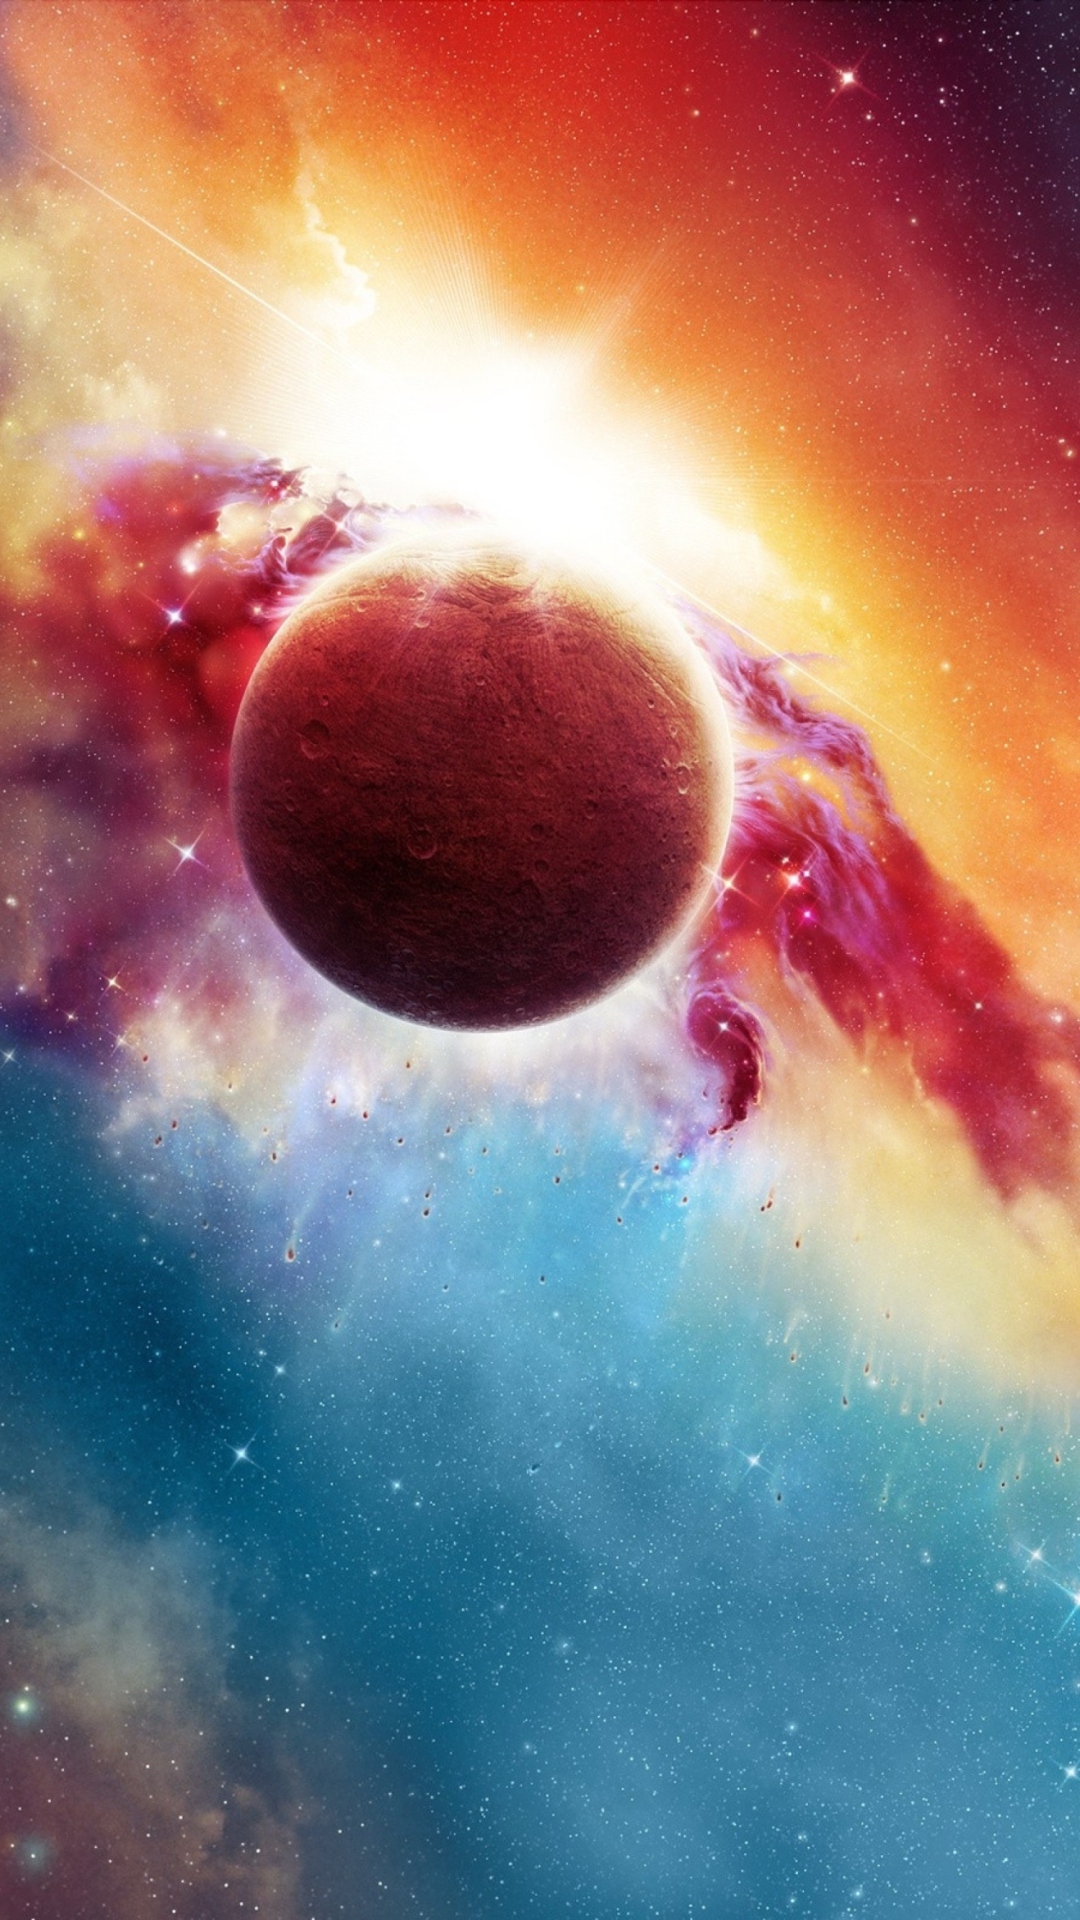 Colorful Space And Planet wallpaper 1080x1920